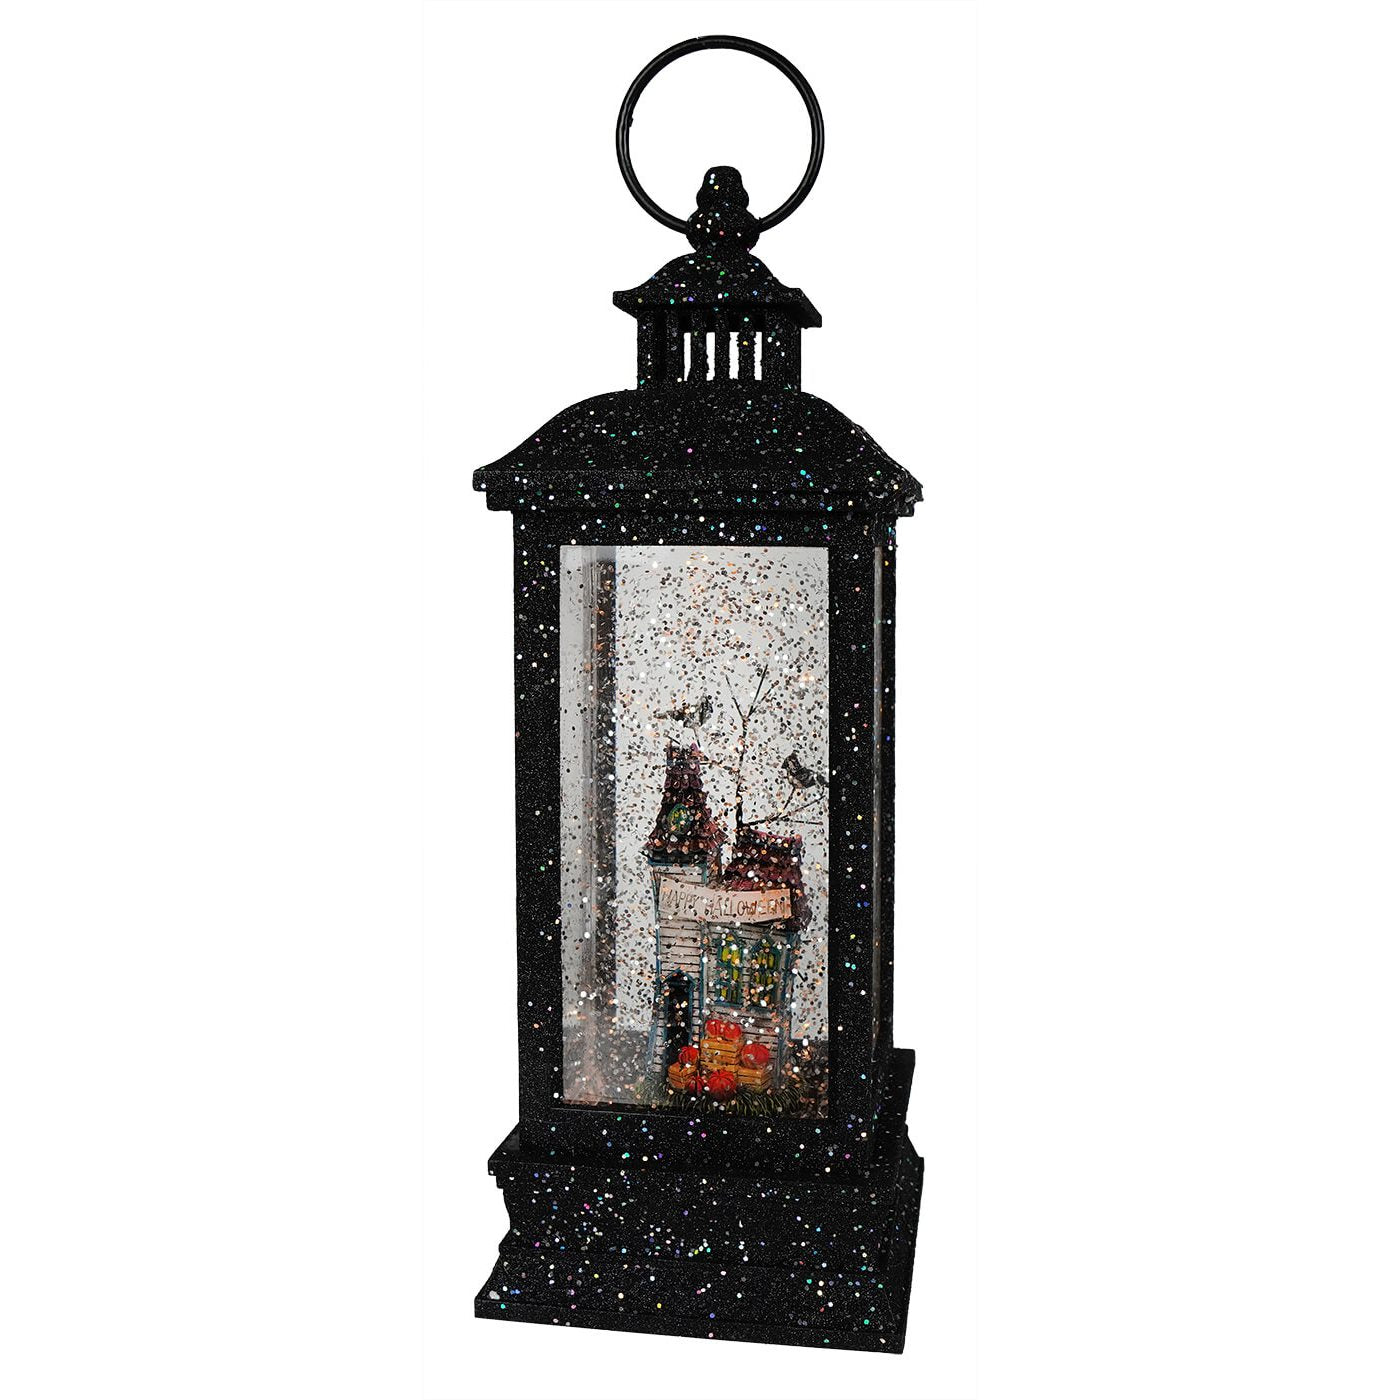 Haunted House Lighted Water Lantern